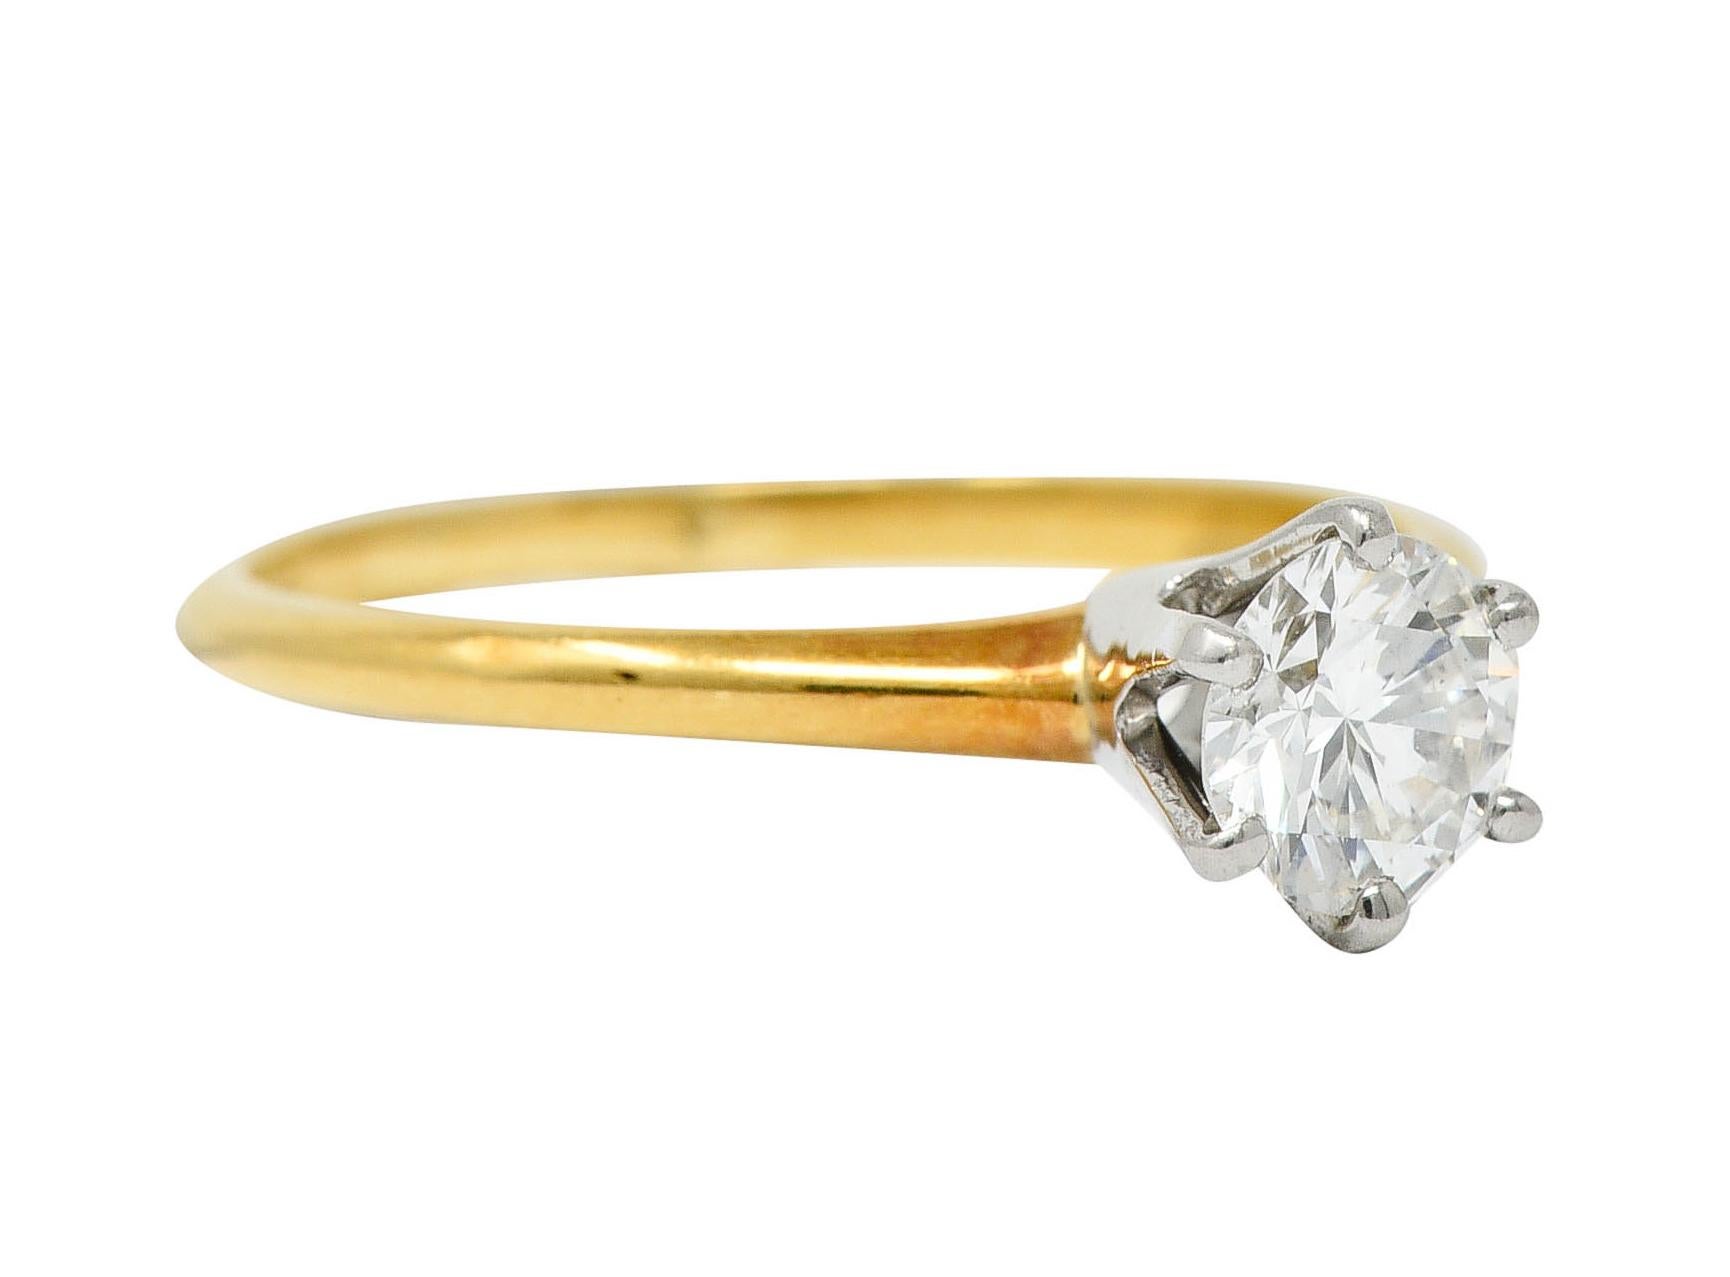 Classic solitaire ring centers a round brilliant cut diamond

Weighing approximately 0.35 carat with G color and VS1 clarity

Set in a six pronged platinum head and completes as a polished yellow gold shank

Stamped for platinum and 14 karat